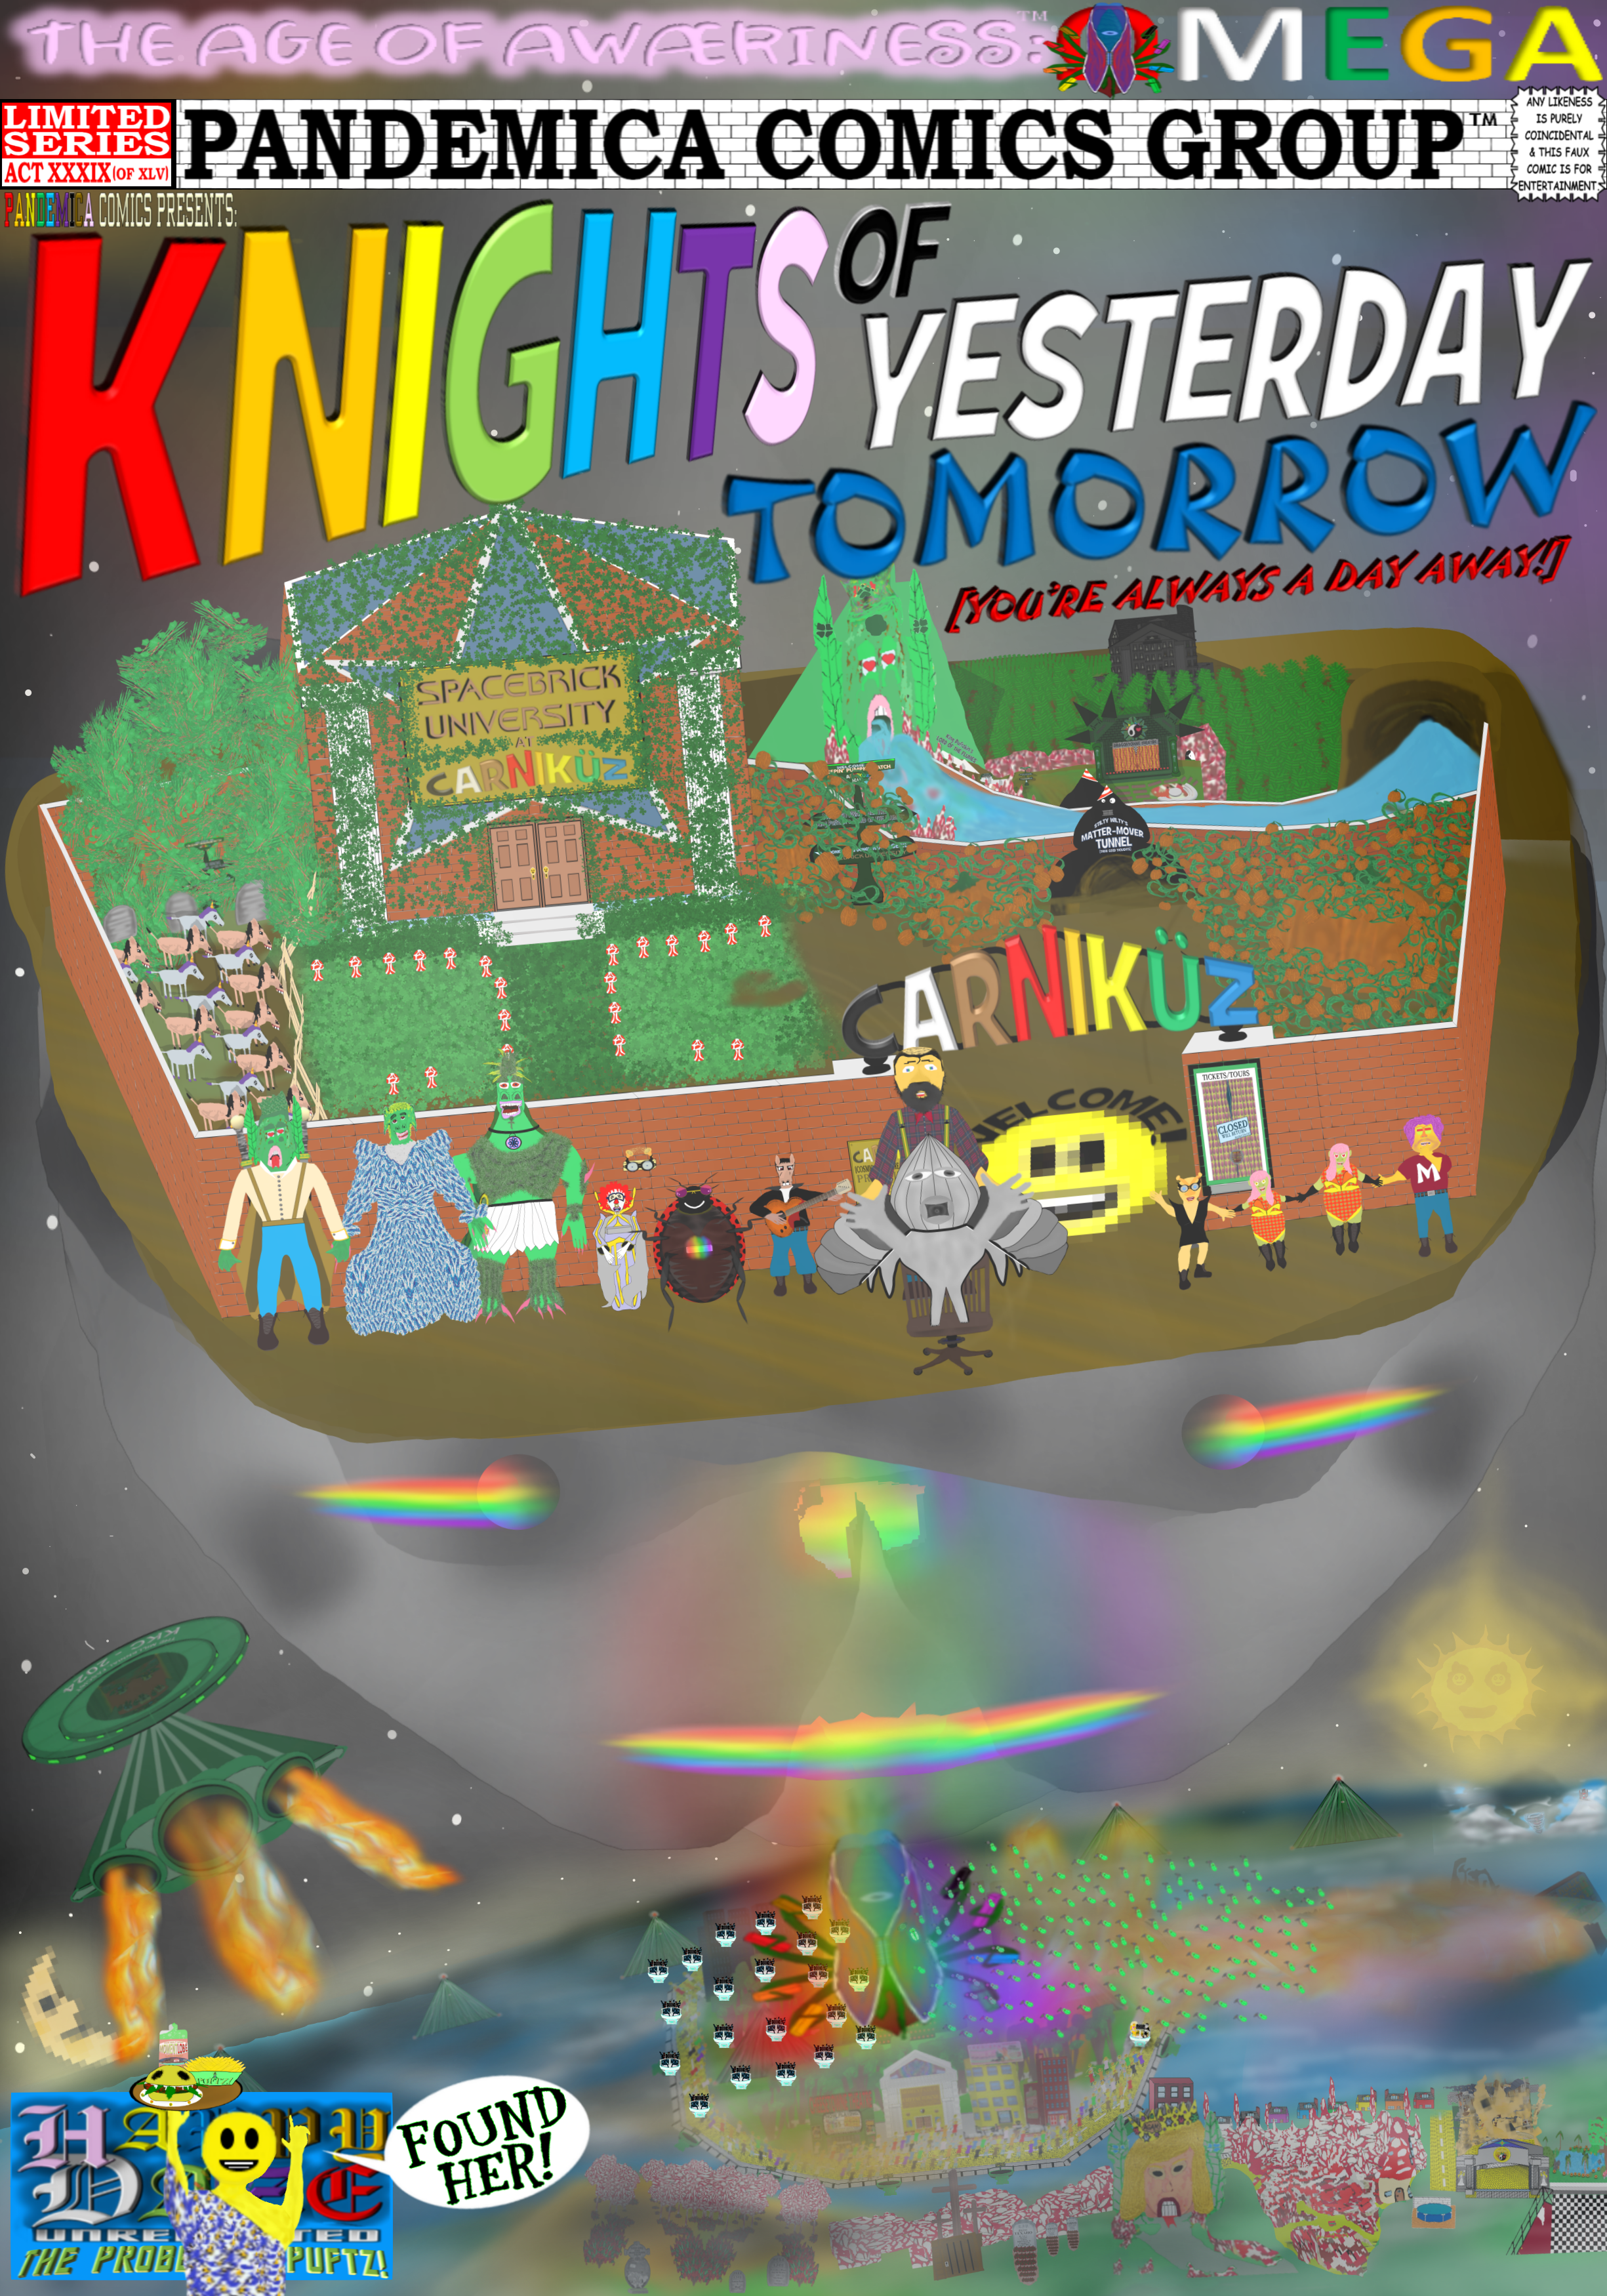 Pandemica Comics Presents: Knights of Yesterday Tomorrow [You're Always A Day Away!]